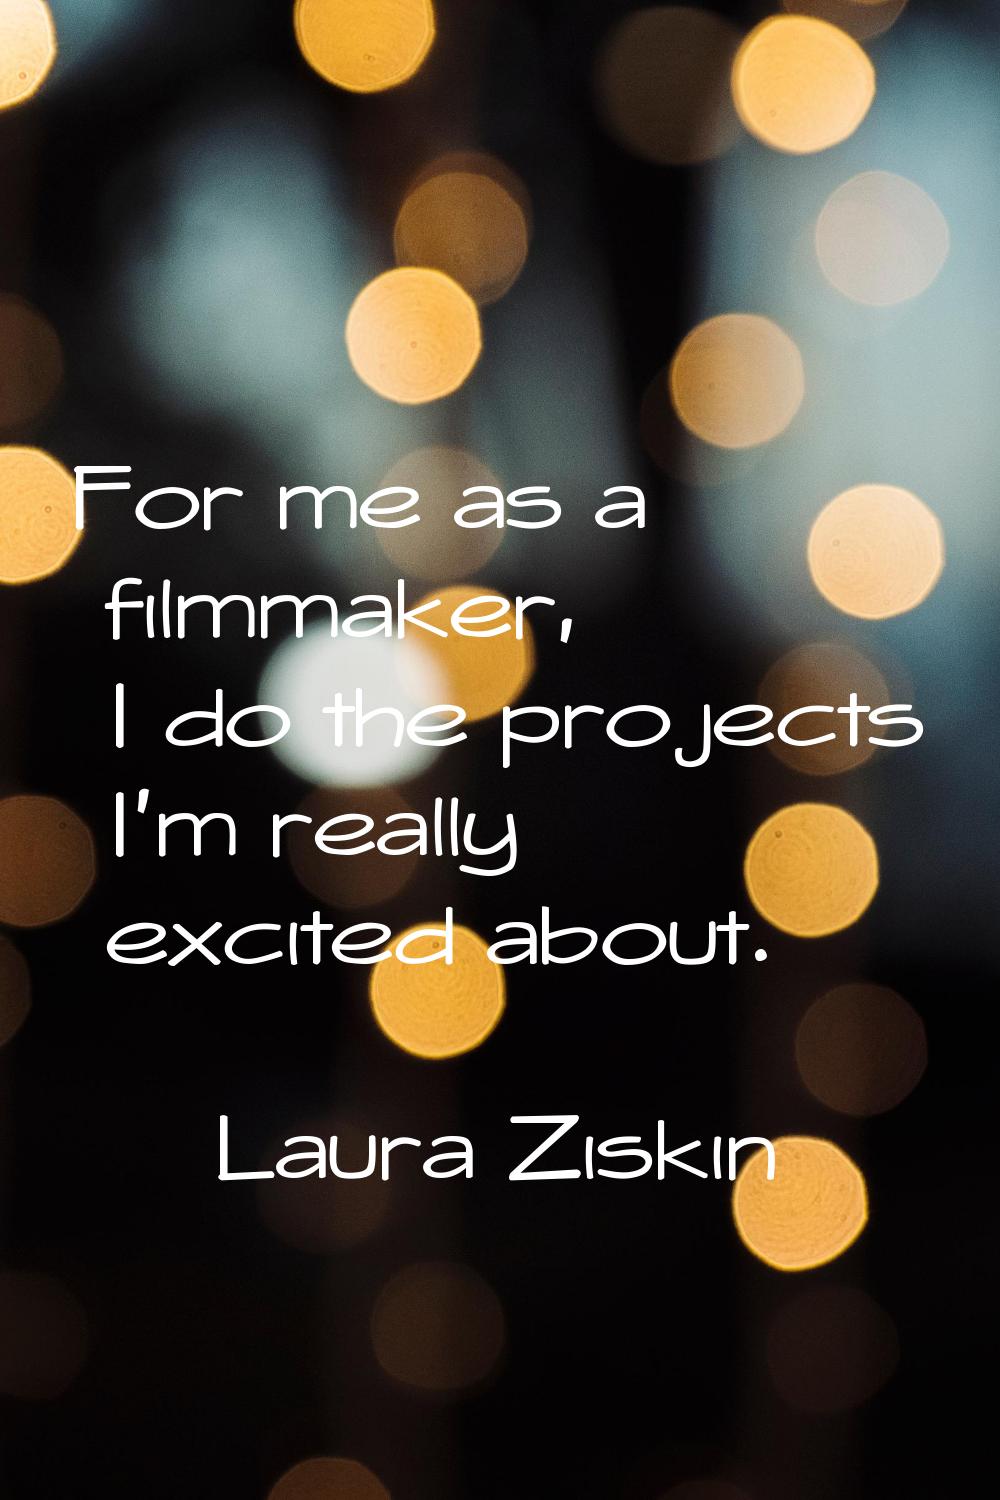 For me as a filmmaker, I do the projects I'm really excited about.